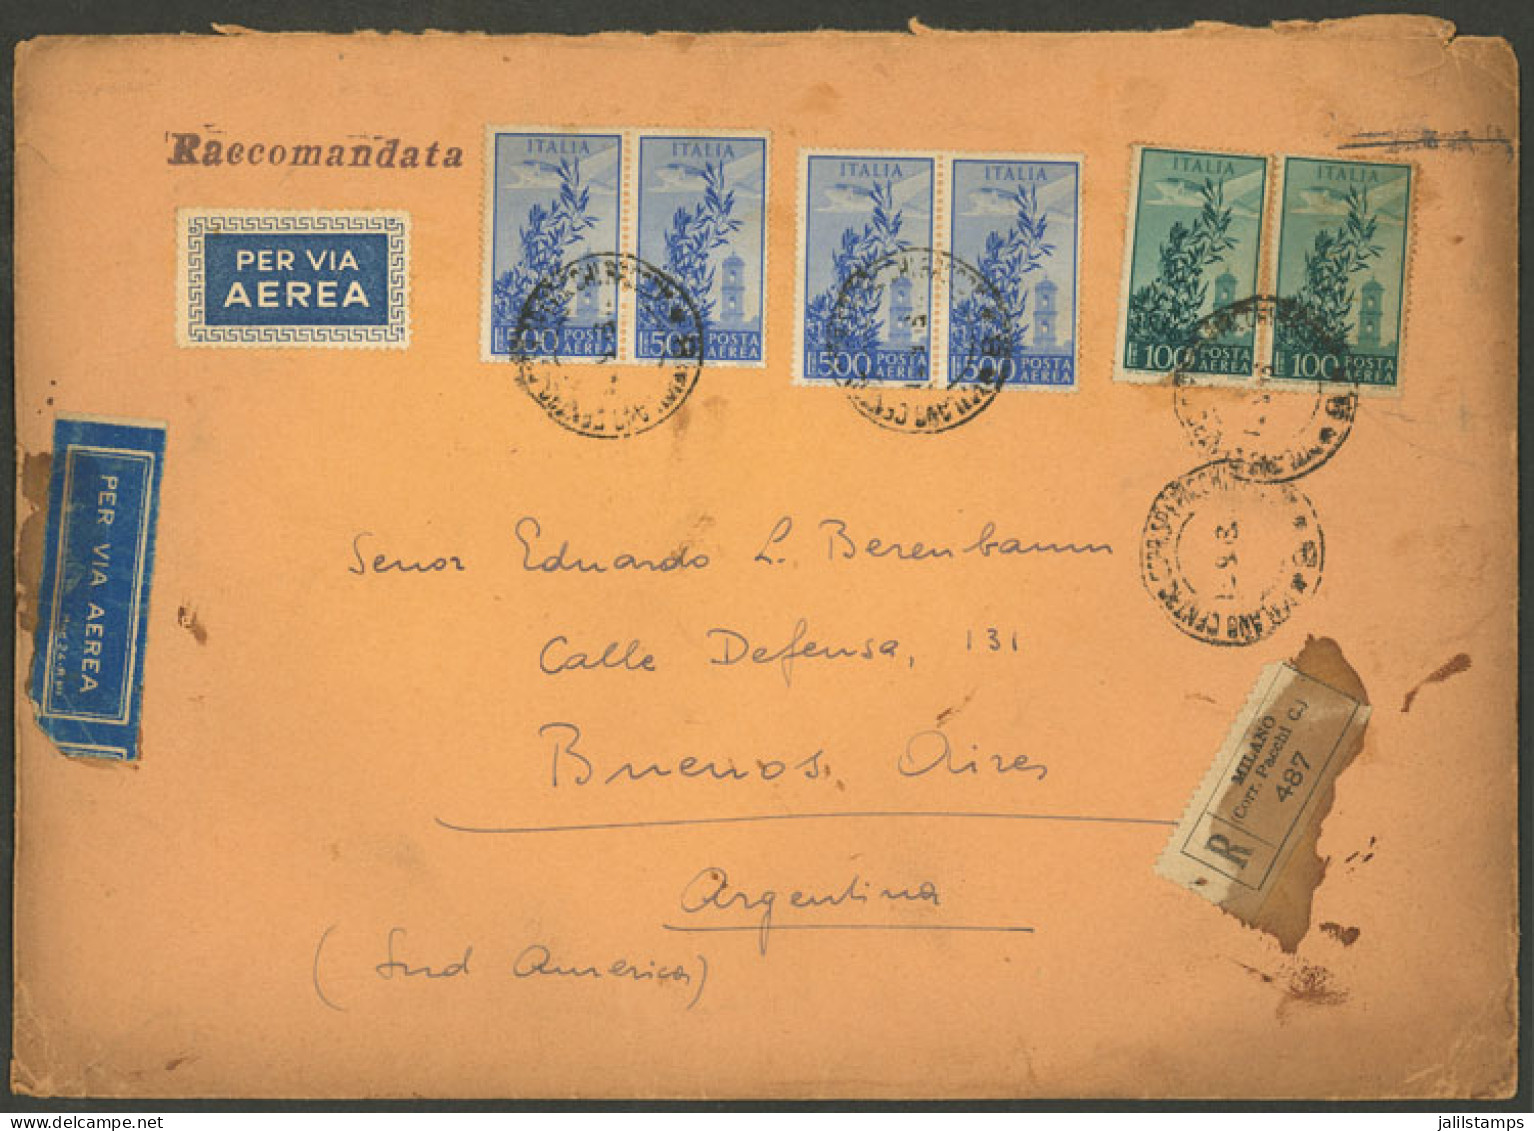 ITALY: 15/SE/1948 Milano - Argentina, Registered Airmail Cover Franked With 2,200 L., Some Small Defects, Very Nice! - Ohne Zuordnung